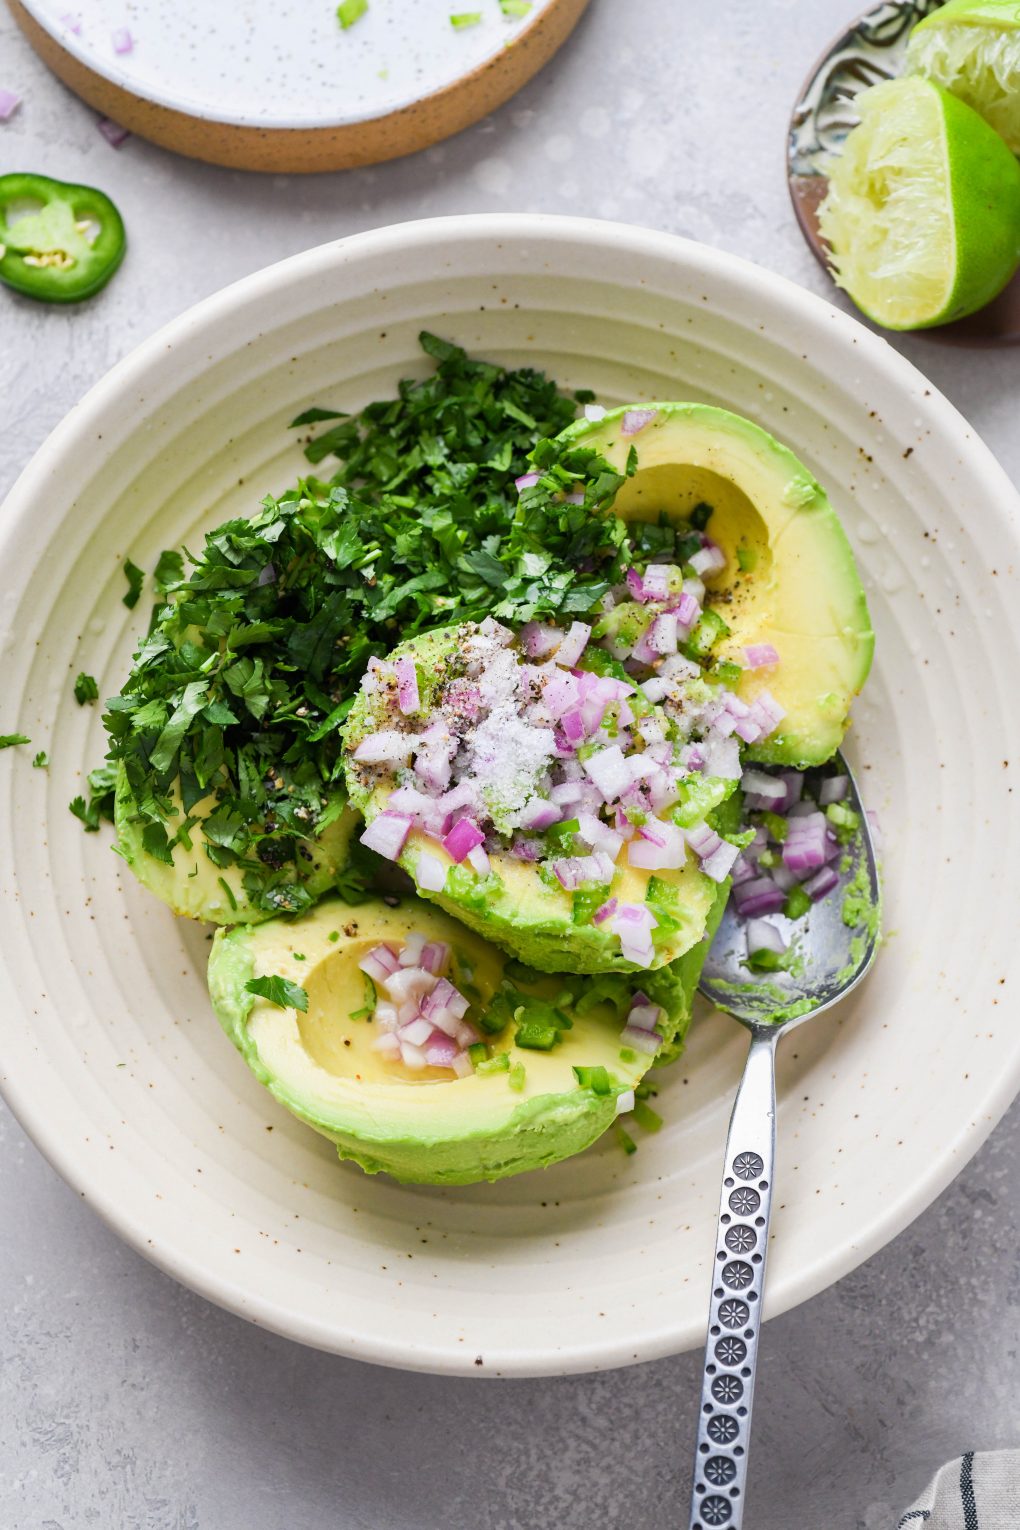 Image of a large cream colored speckled bowl with ingredients for easy guacamole - avocado scooped out of the skin, diced red onion, jalapeno, cilantro, and salt and pepper. On a light grey background. 